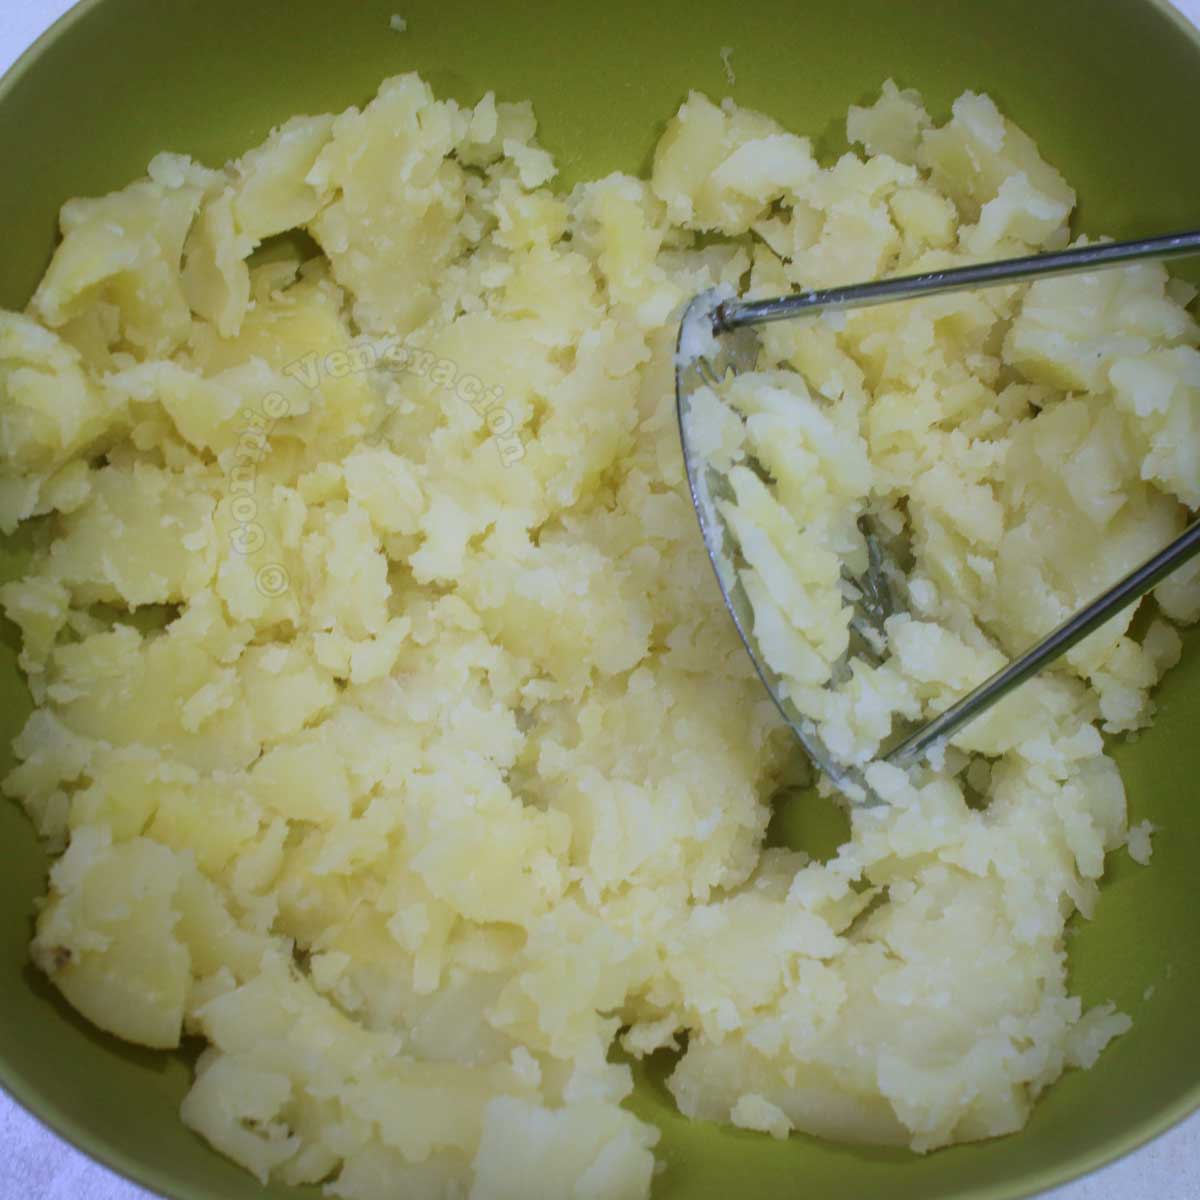 Coarsely mashed potatoes in mixing bowl